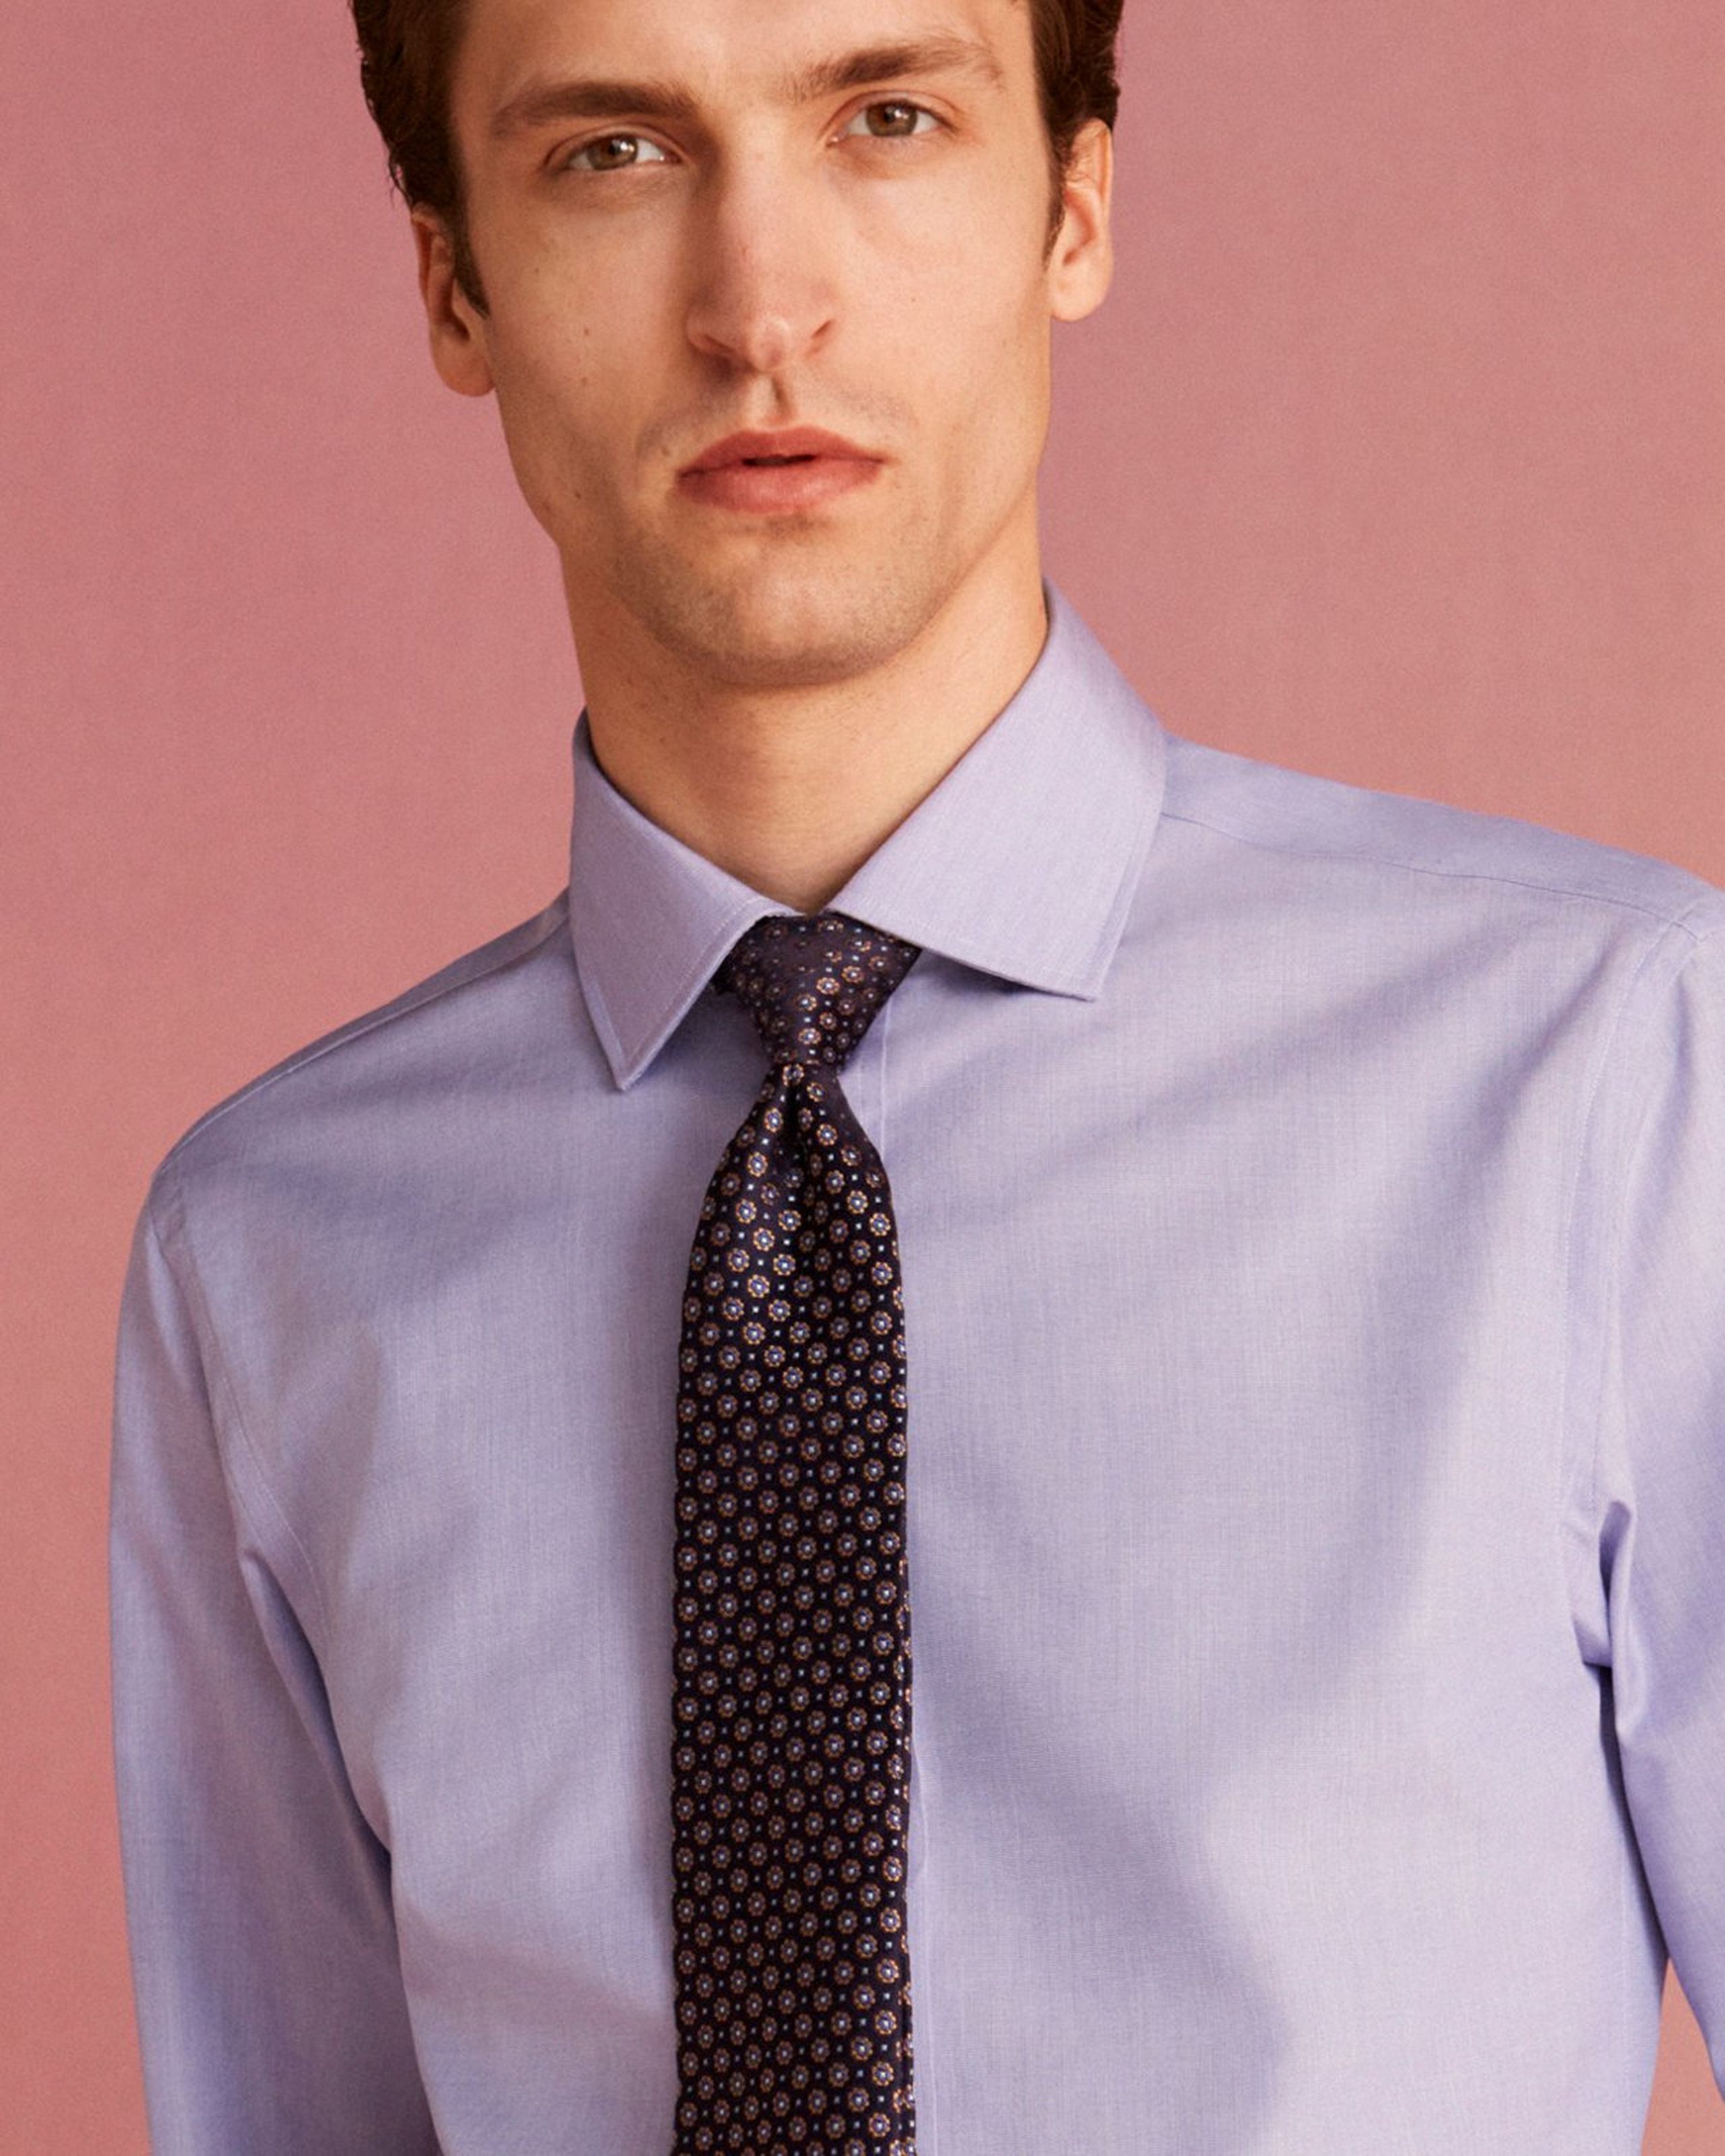 Man wears blue shirt with tie